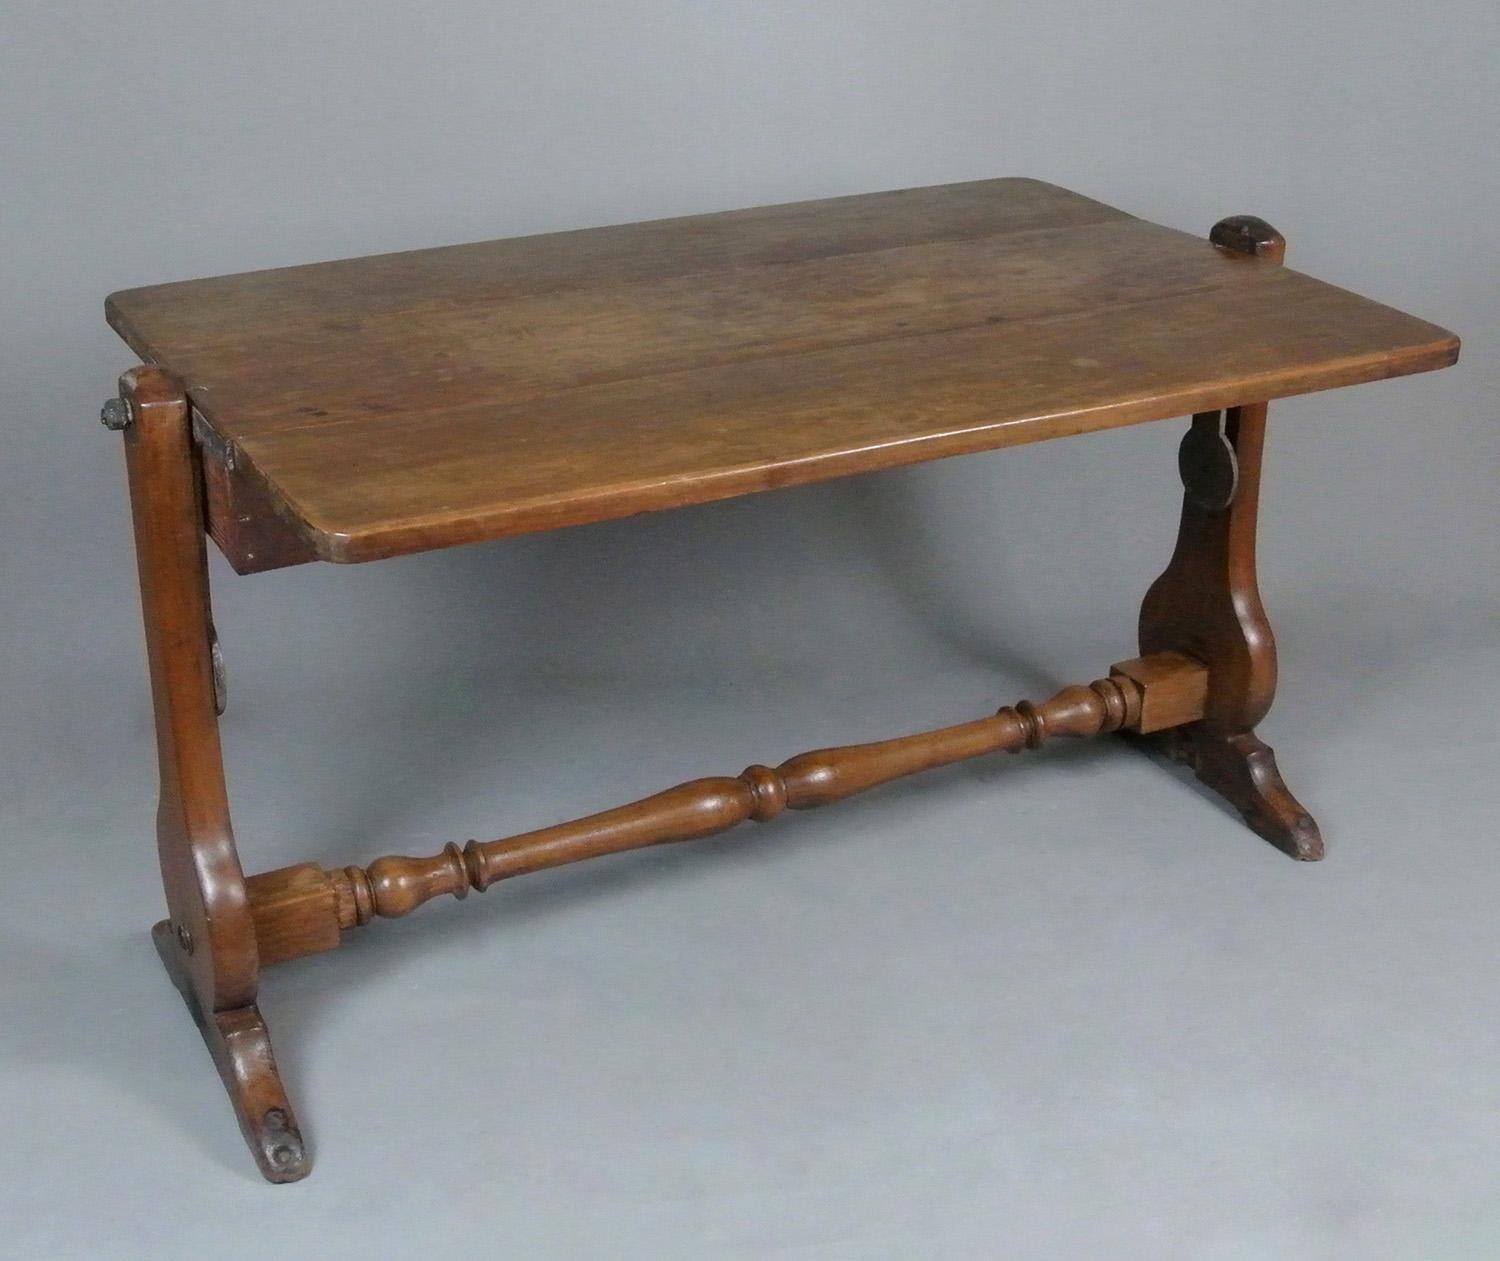 Unique and Interesting Georgian Teak Ship’s Table c. 1800 In Good Condition For Sale In Heathfield, GB